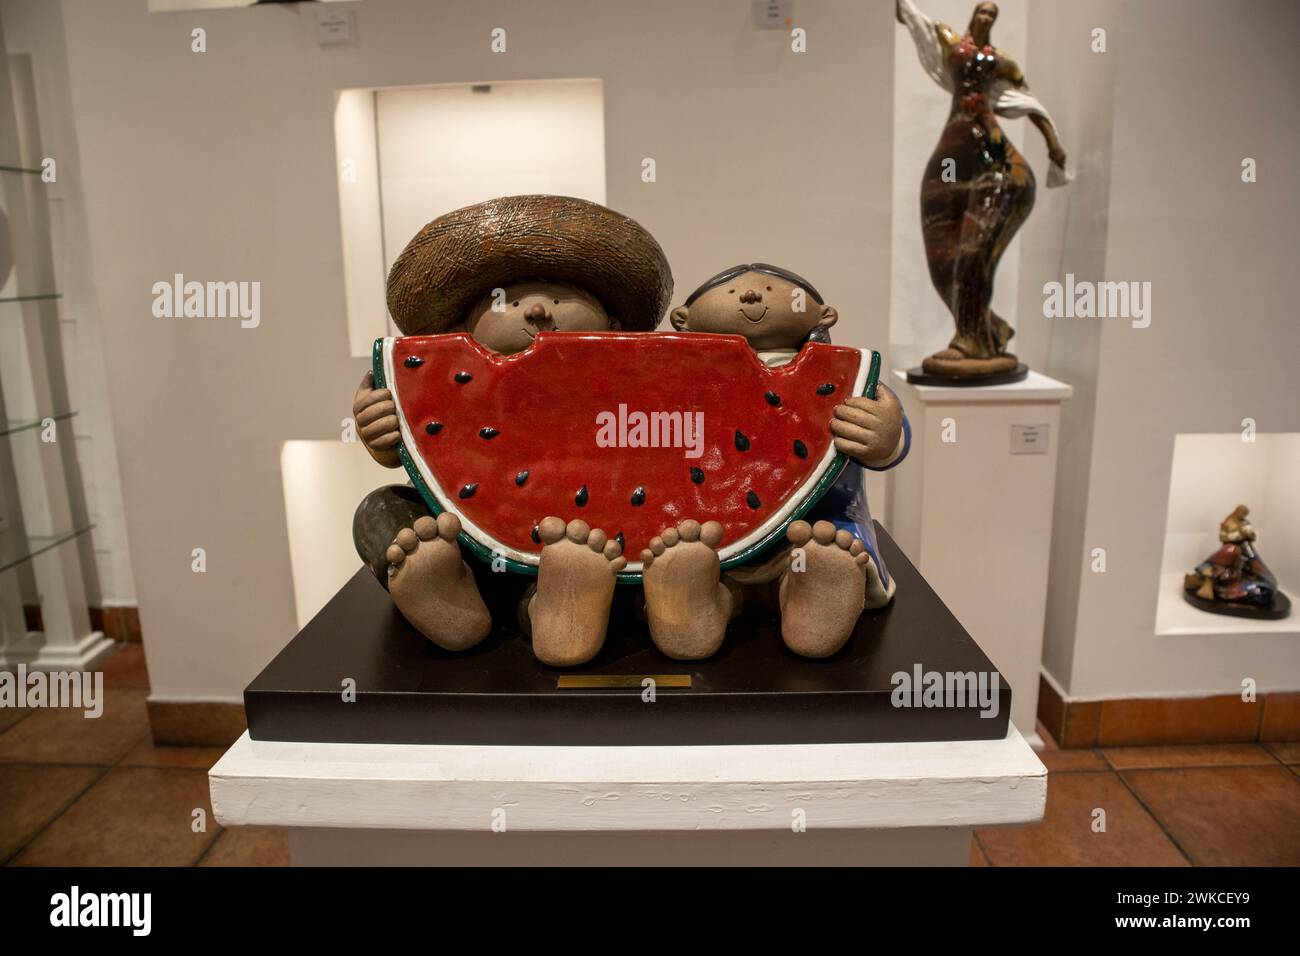 This is a ceramic artwork in a Mexican art gallery representing a Mexican couple eating a watermelon. Stock Photo